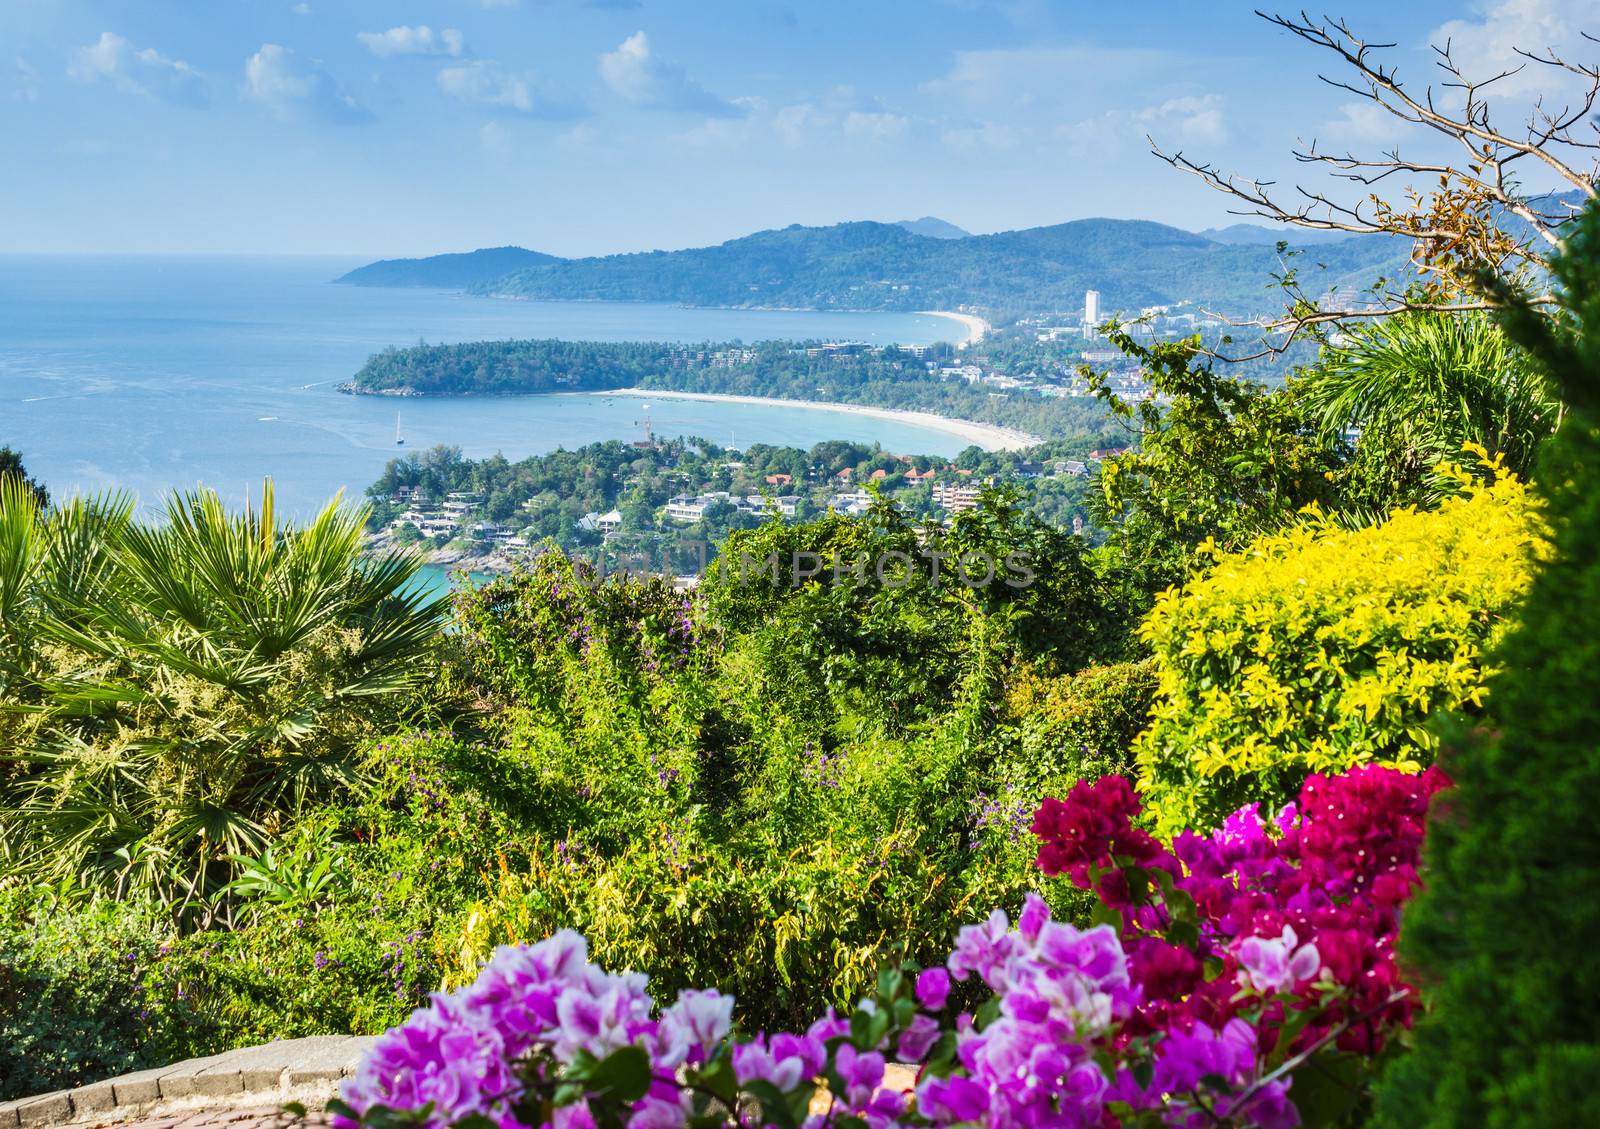 Beautiful view of Phuket island from viewpoint